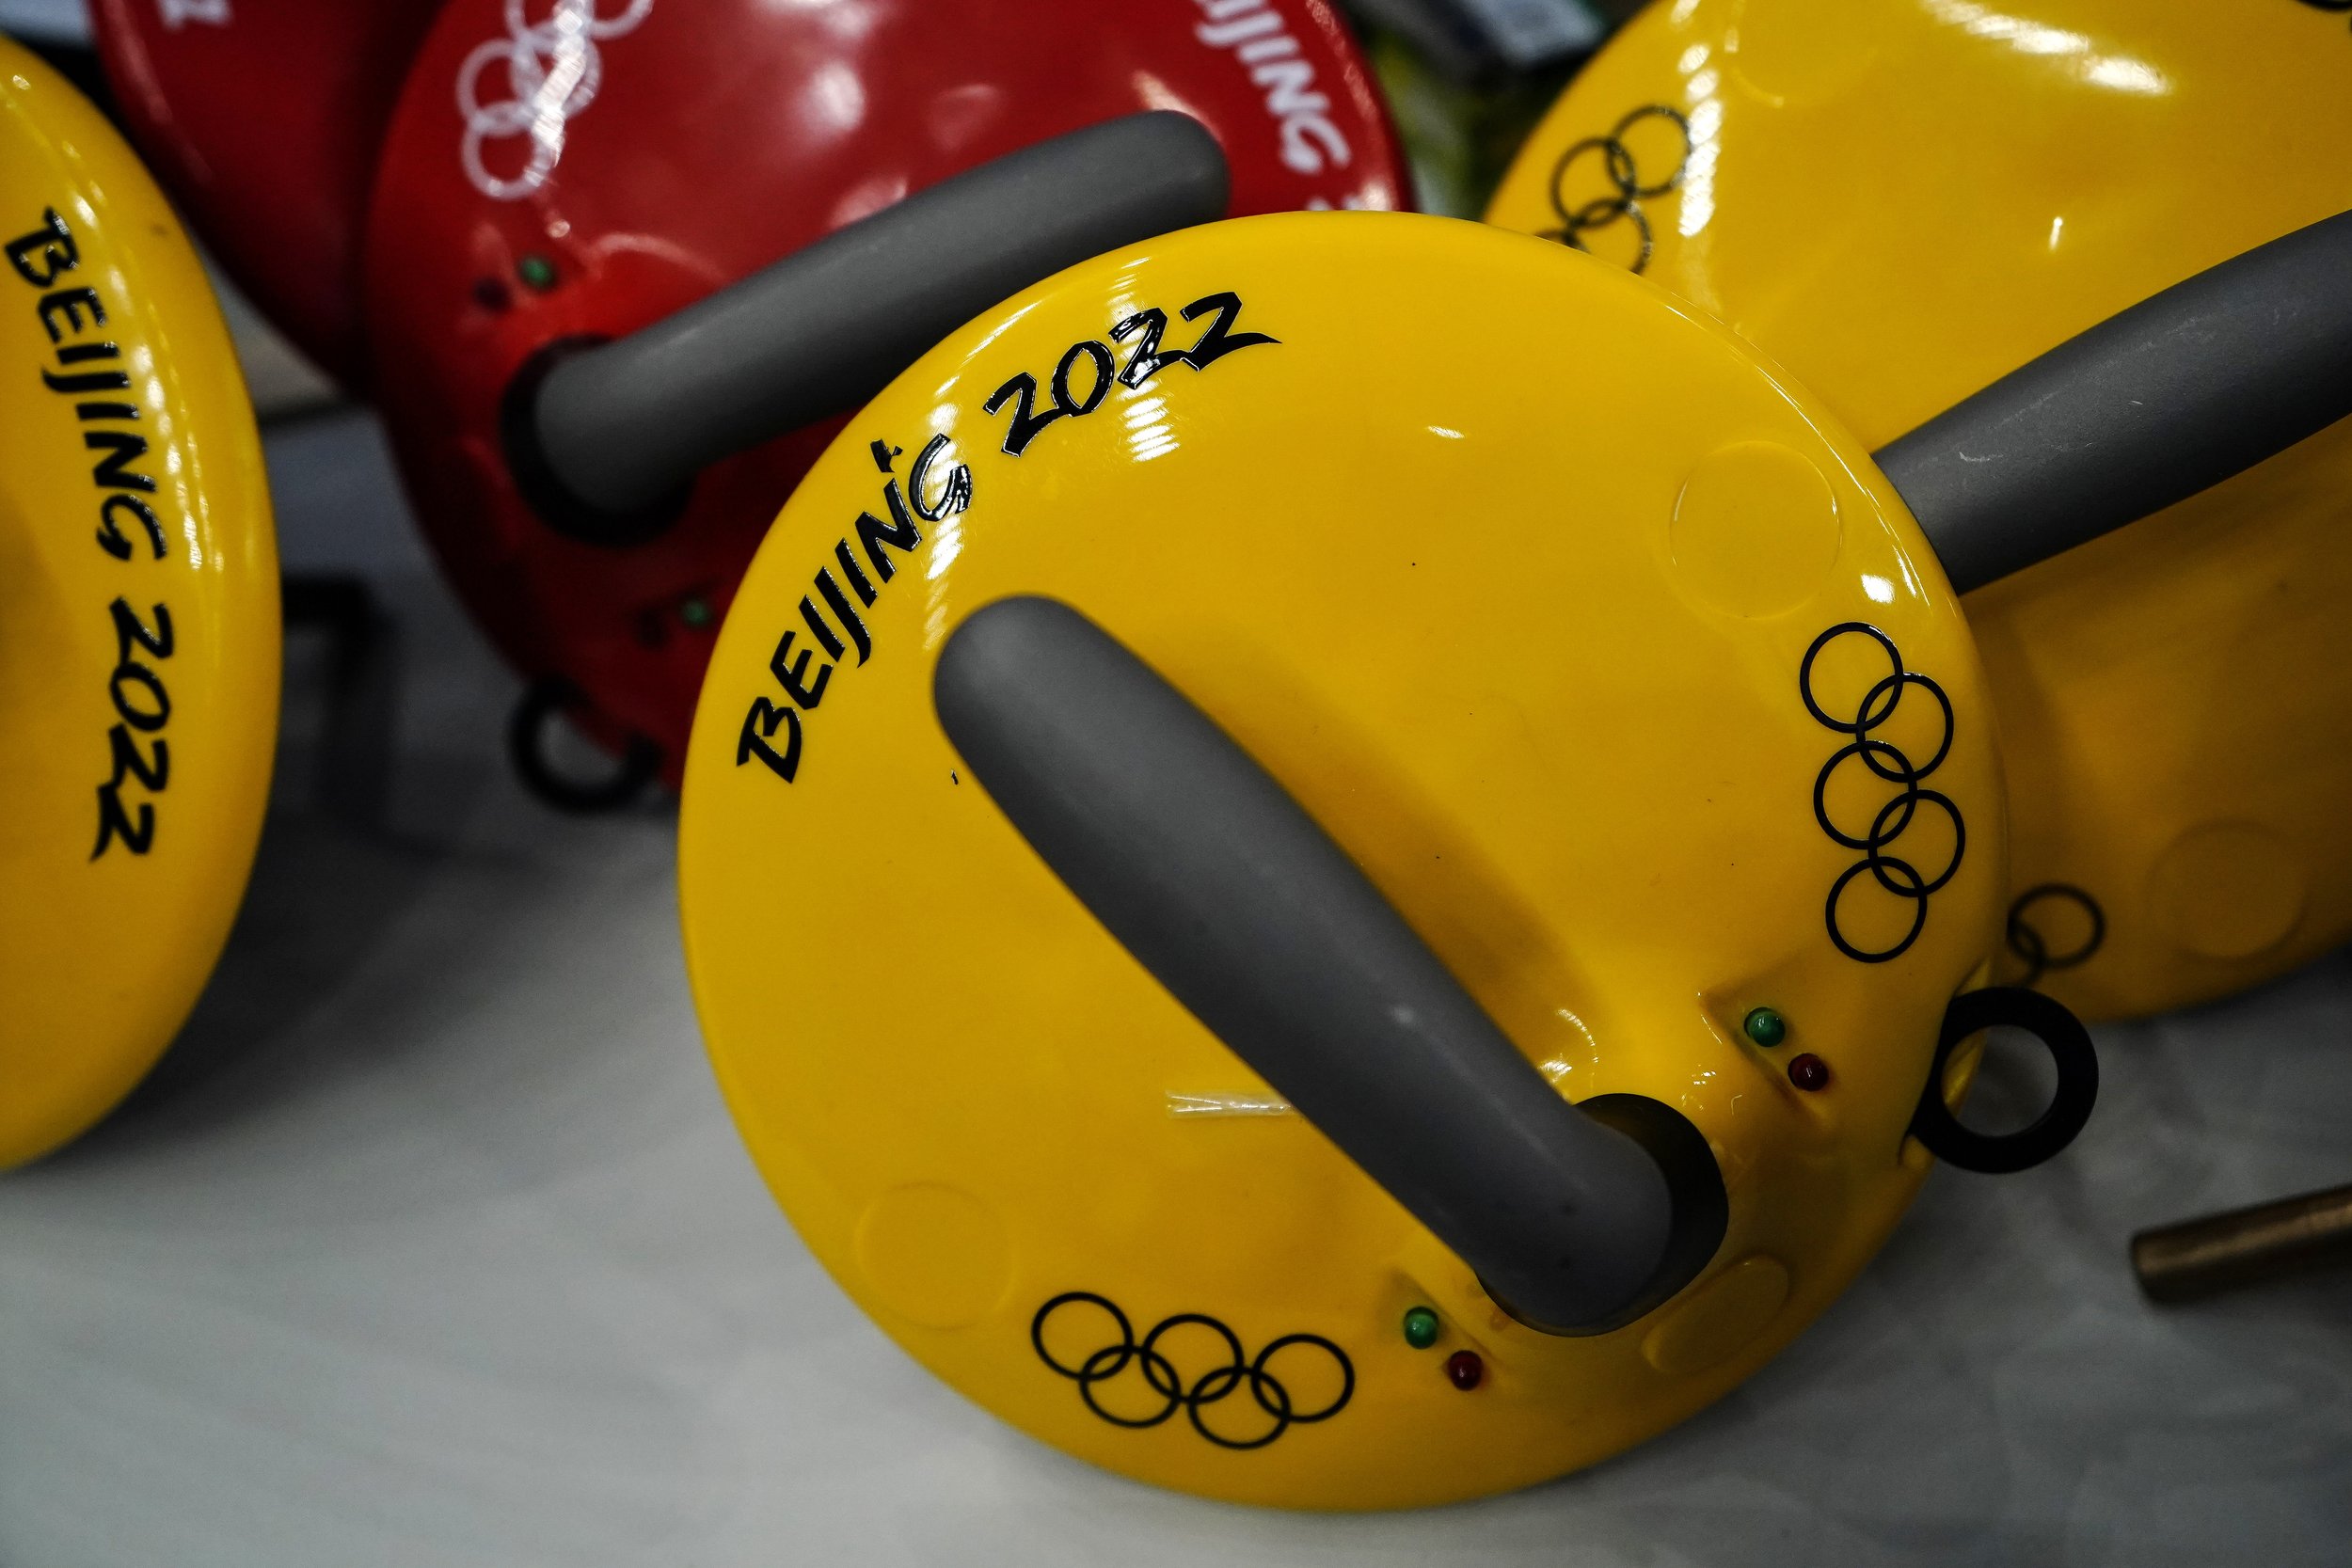  The Olympic rings are seen on a curling stone ahead of the Beijing Winter Olympics Wednesday, Feb. 2, 2022, in Beijing. (AP Photo/Brynn Anderson) 